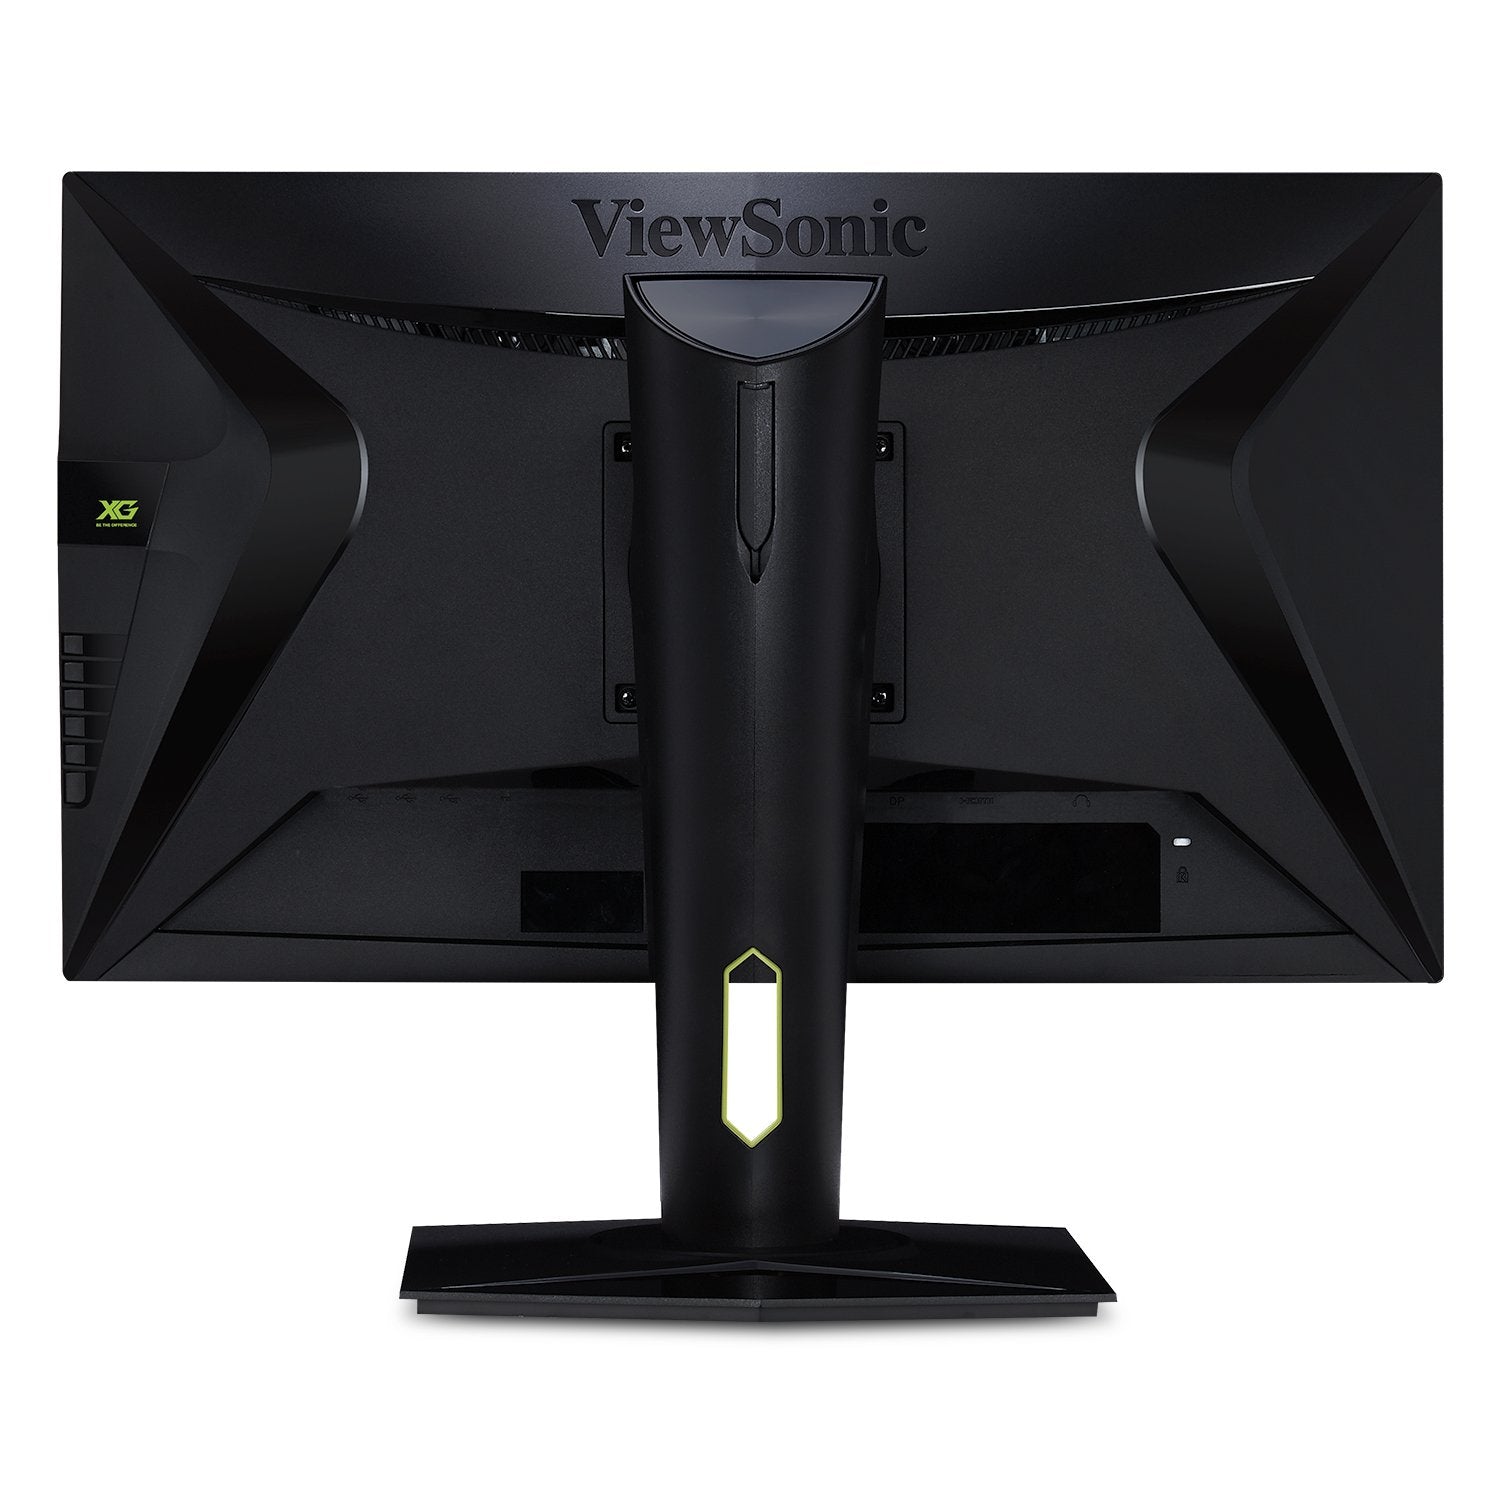 ViewSonic XG2560-S 25" HDMI 1080p 240Hz 1ms Gsync with Eye Care Advanced Ergonomics and DP for Esports Gaming Monitor - Certified Refurbished